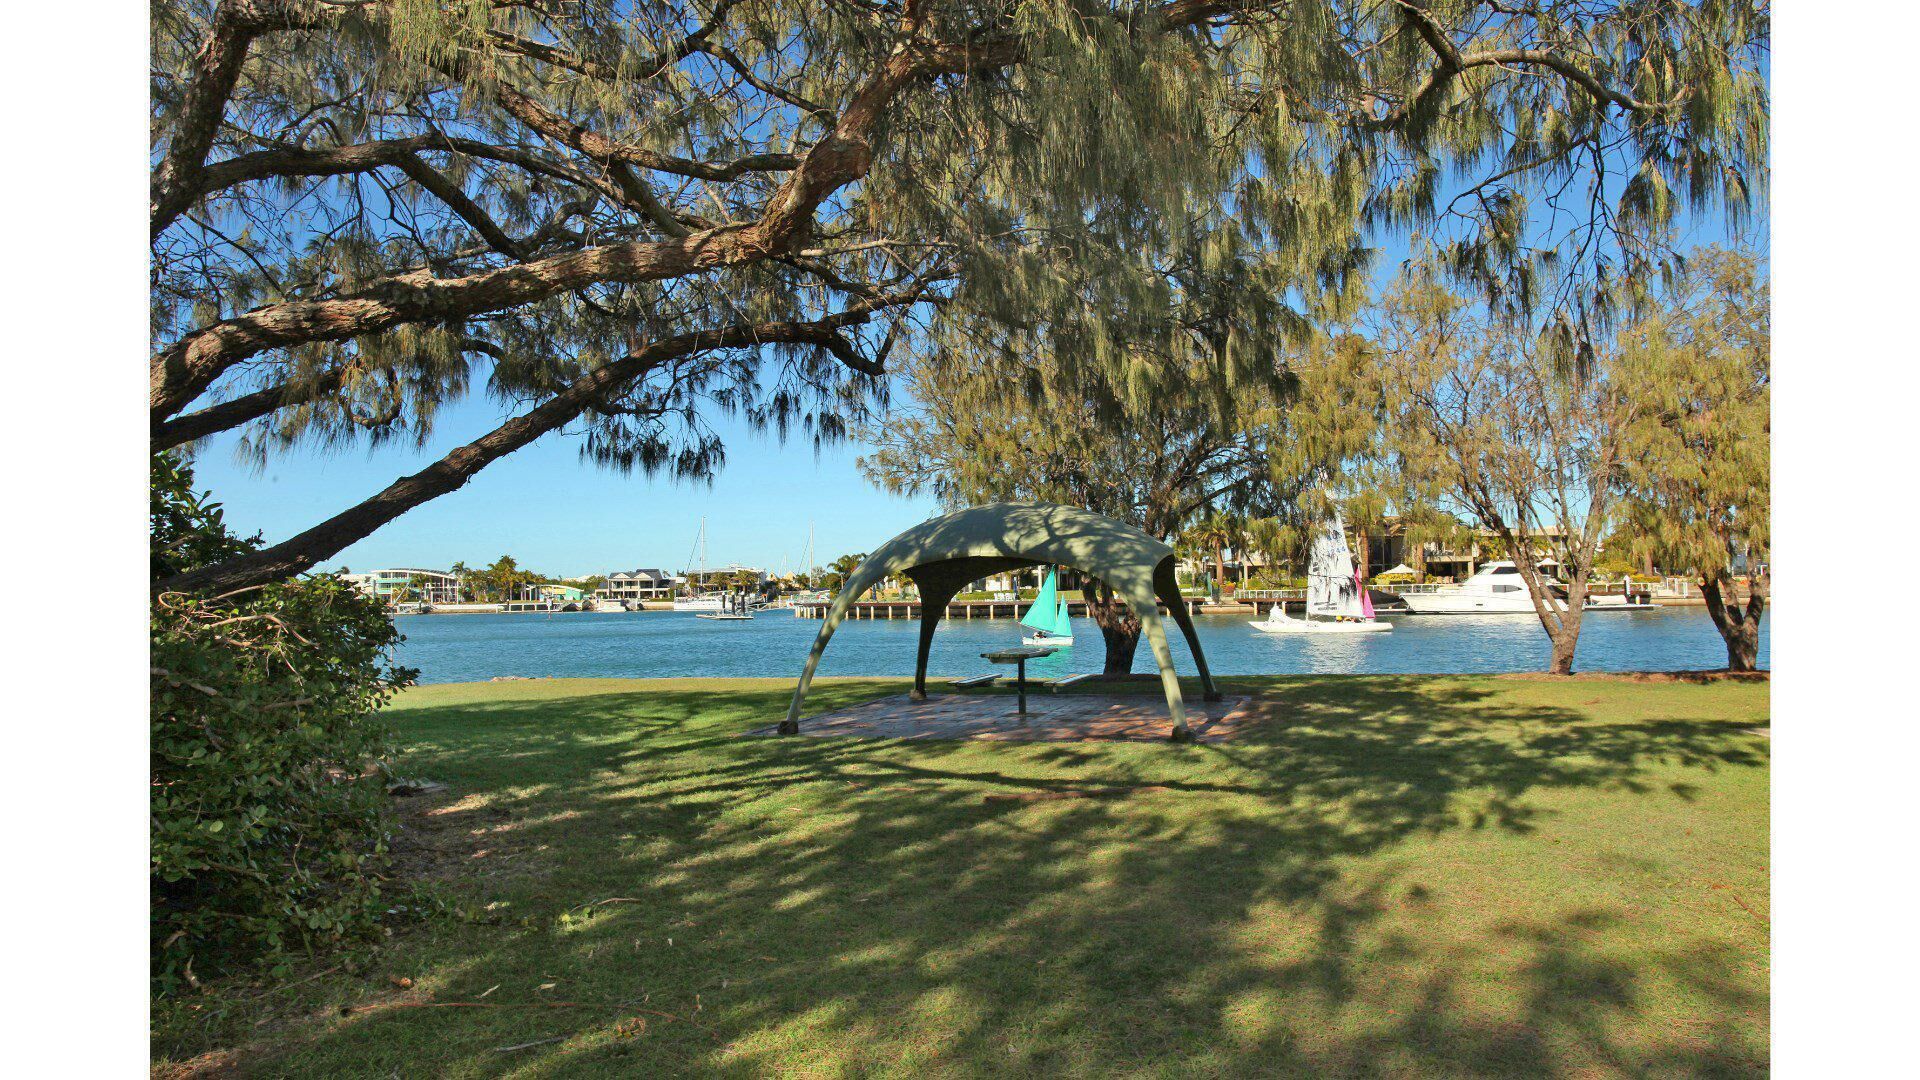 2 Bedroom Apartment in the heart of Mooloolaba